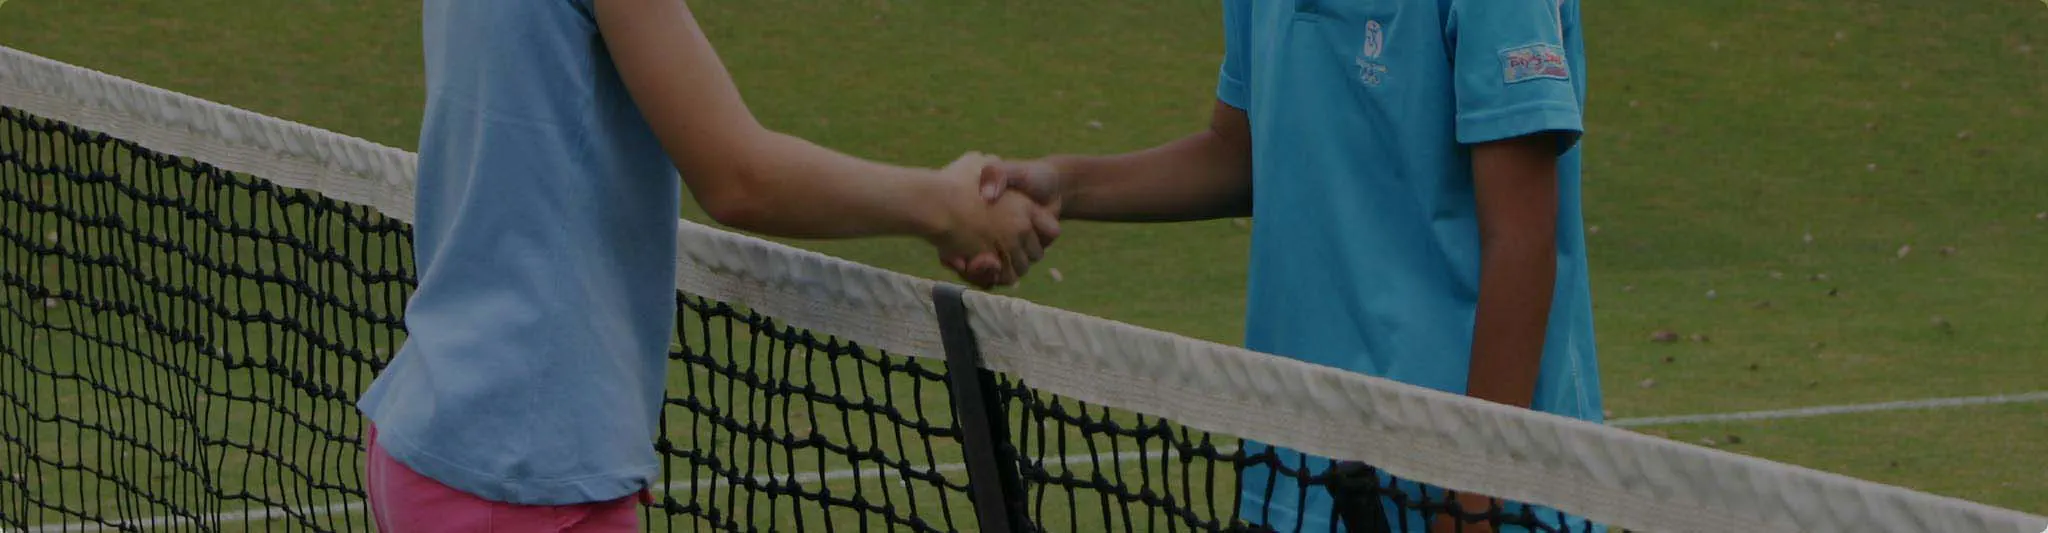 Junior tennis players shaking hands at the net